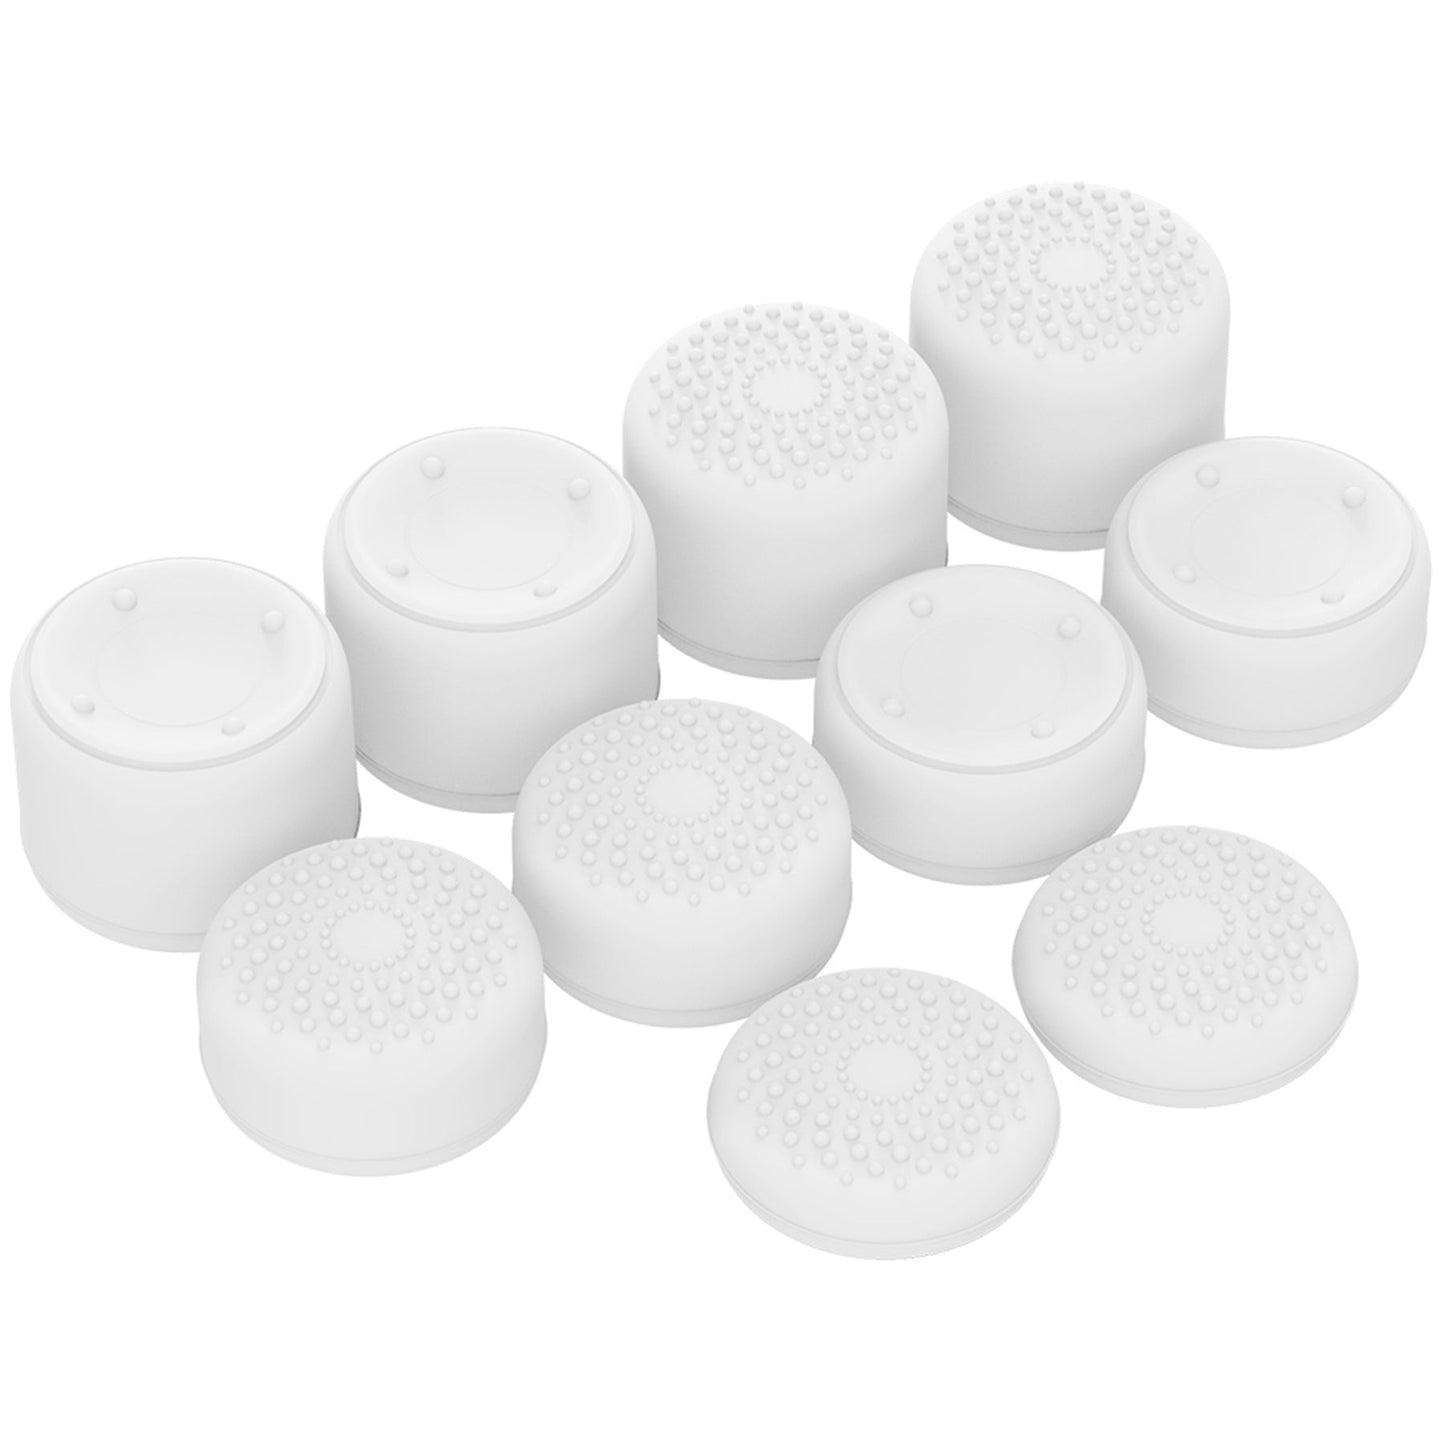 PlayVital White Ergonomic Thumb Stick Grips for Nintendo Switch Pro, PS5, PS4, Xbox Series X/S, Xbox One, Xbox One X/S Controller - with 3 Height Convex and Concave - Raised Dots & Studded Design - PJM2022 PlayVital